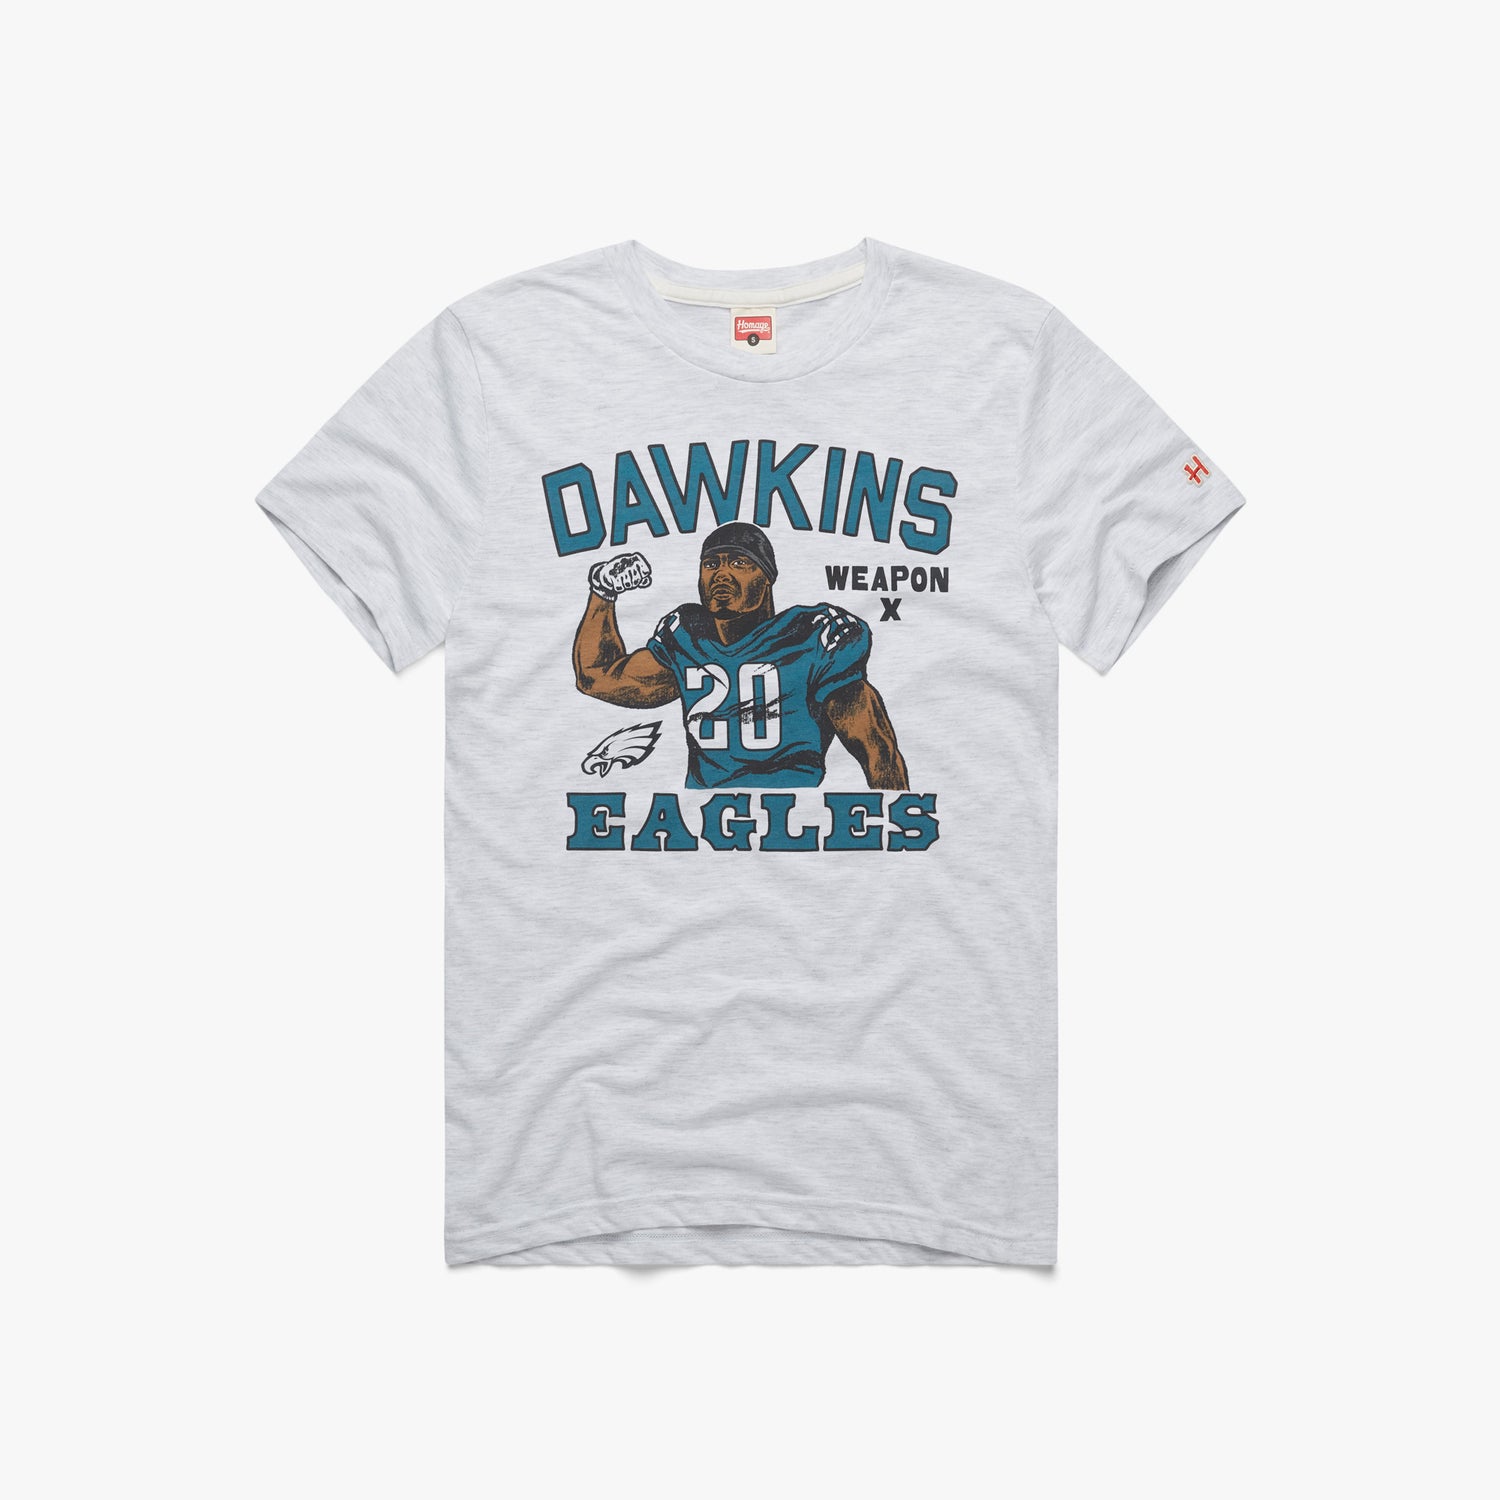 Philadelphia Eagles Brian Dawkins Weapon x T-Shirt | Kelly Green Philadelphia Eagles Apparel from Homage. | Officially Licensed NFL Apparel from